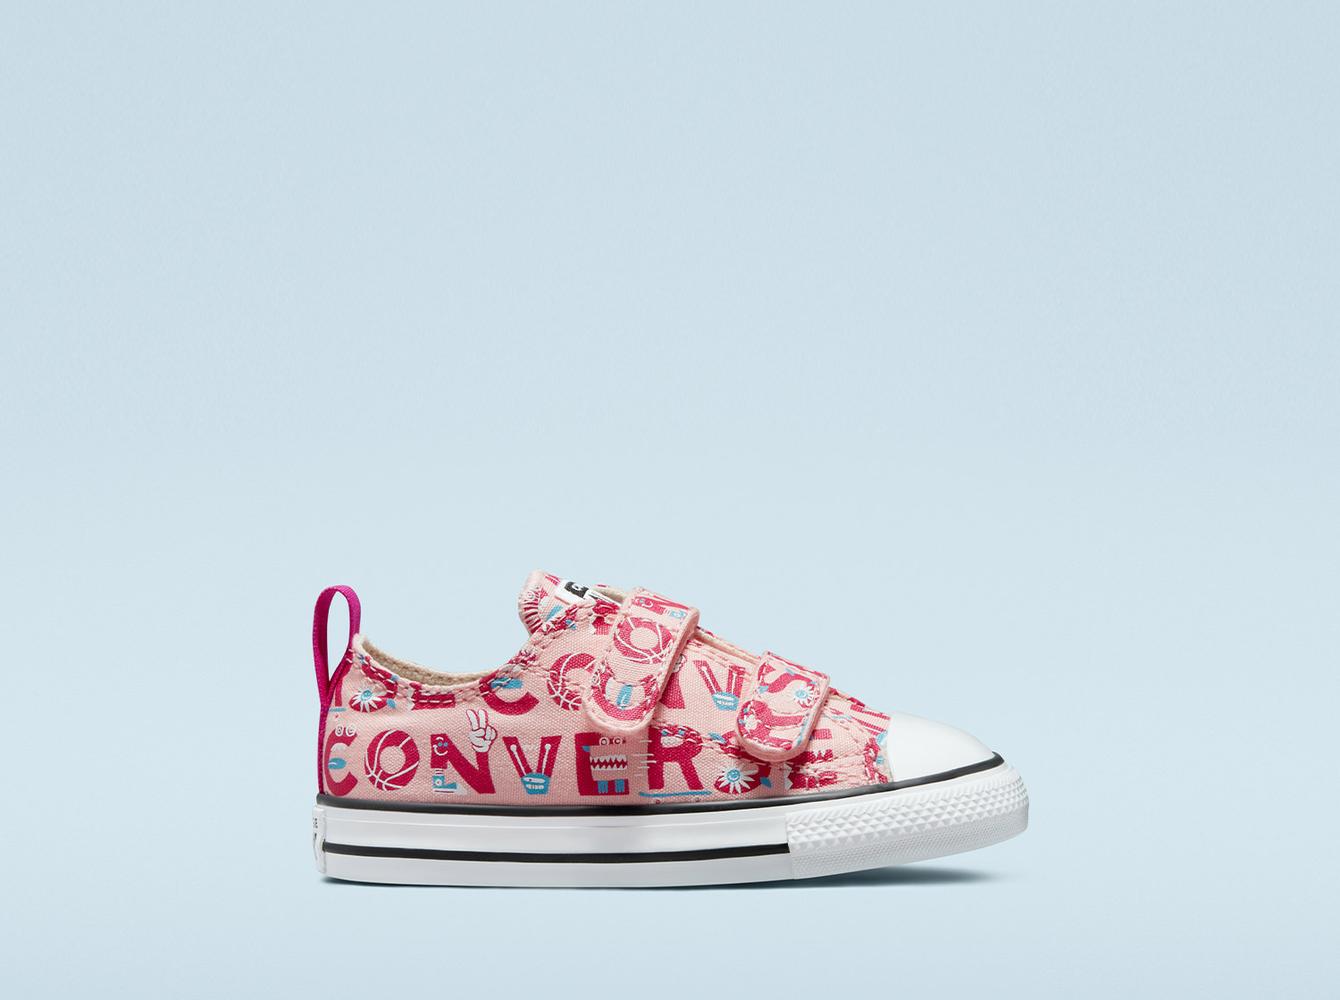 Chuck Taylor All Star 2V Creature Feature